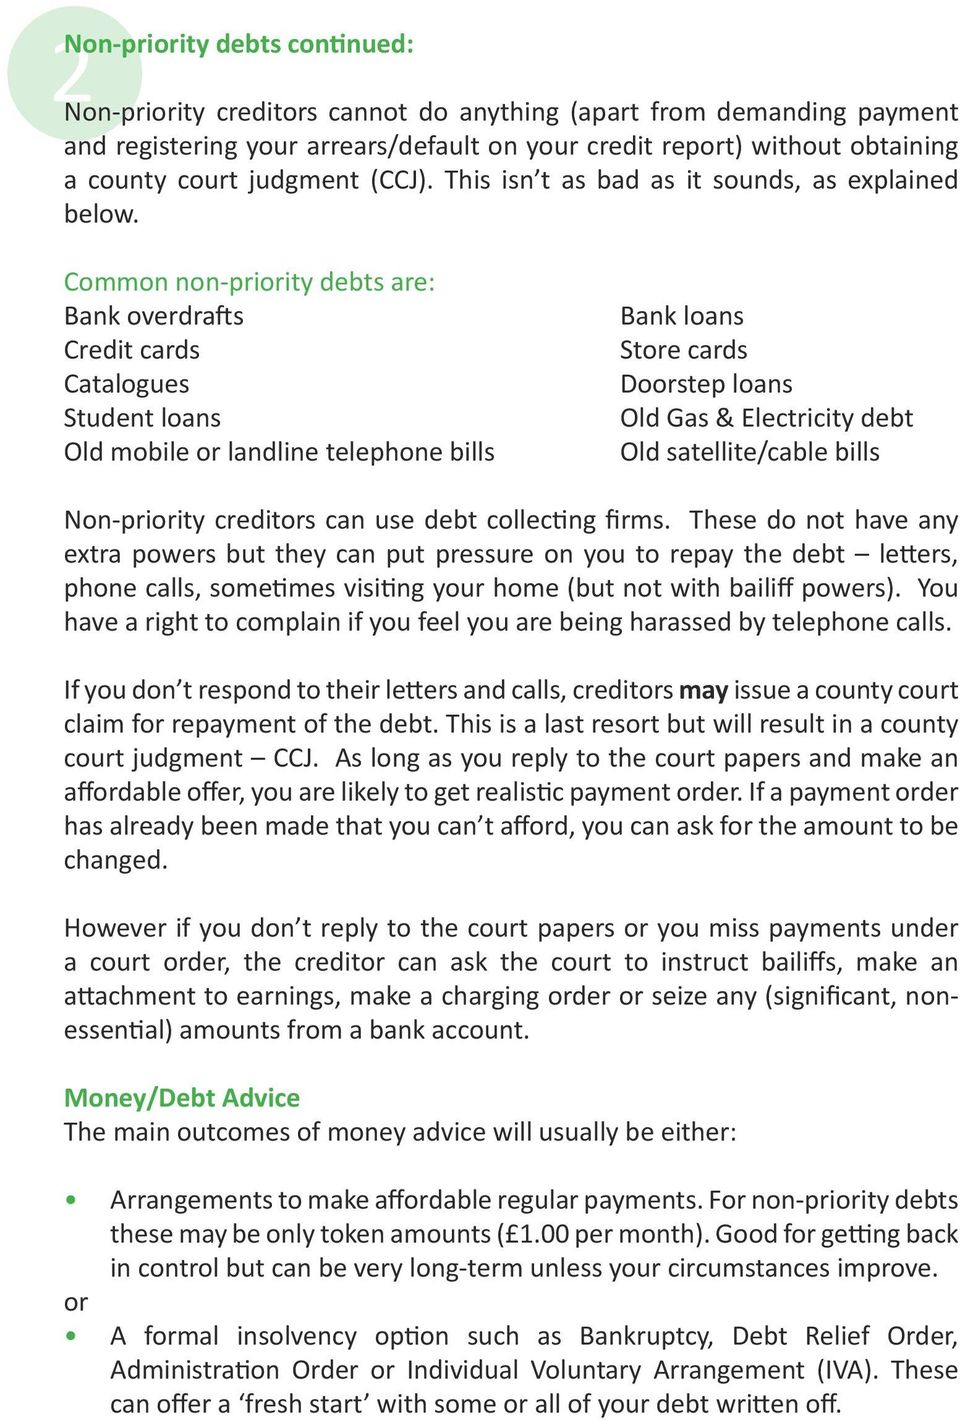 Common non-priority debts are: Bank overdrafts Credit cards Catalogues Student loans Old mobile or landline telephone bills Bank loans Store cards Doorstep loans Old Gas & Electricity debt Old